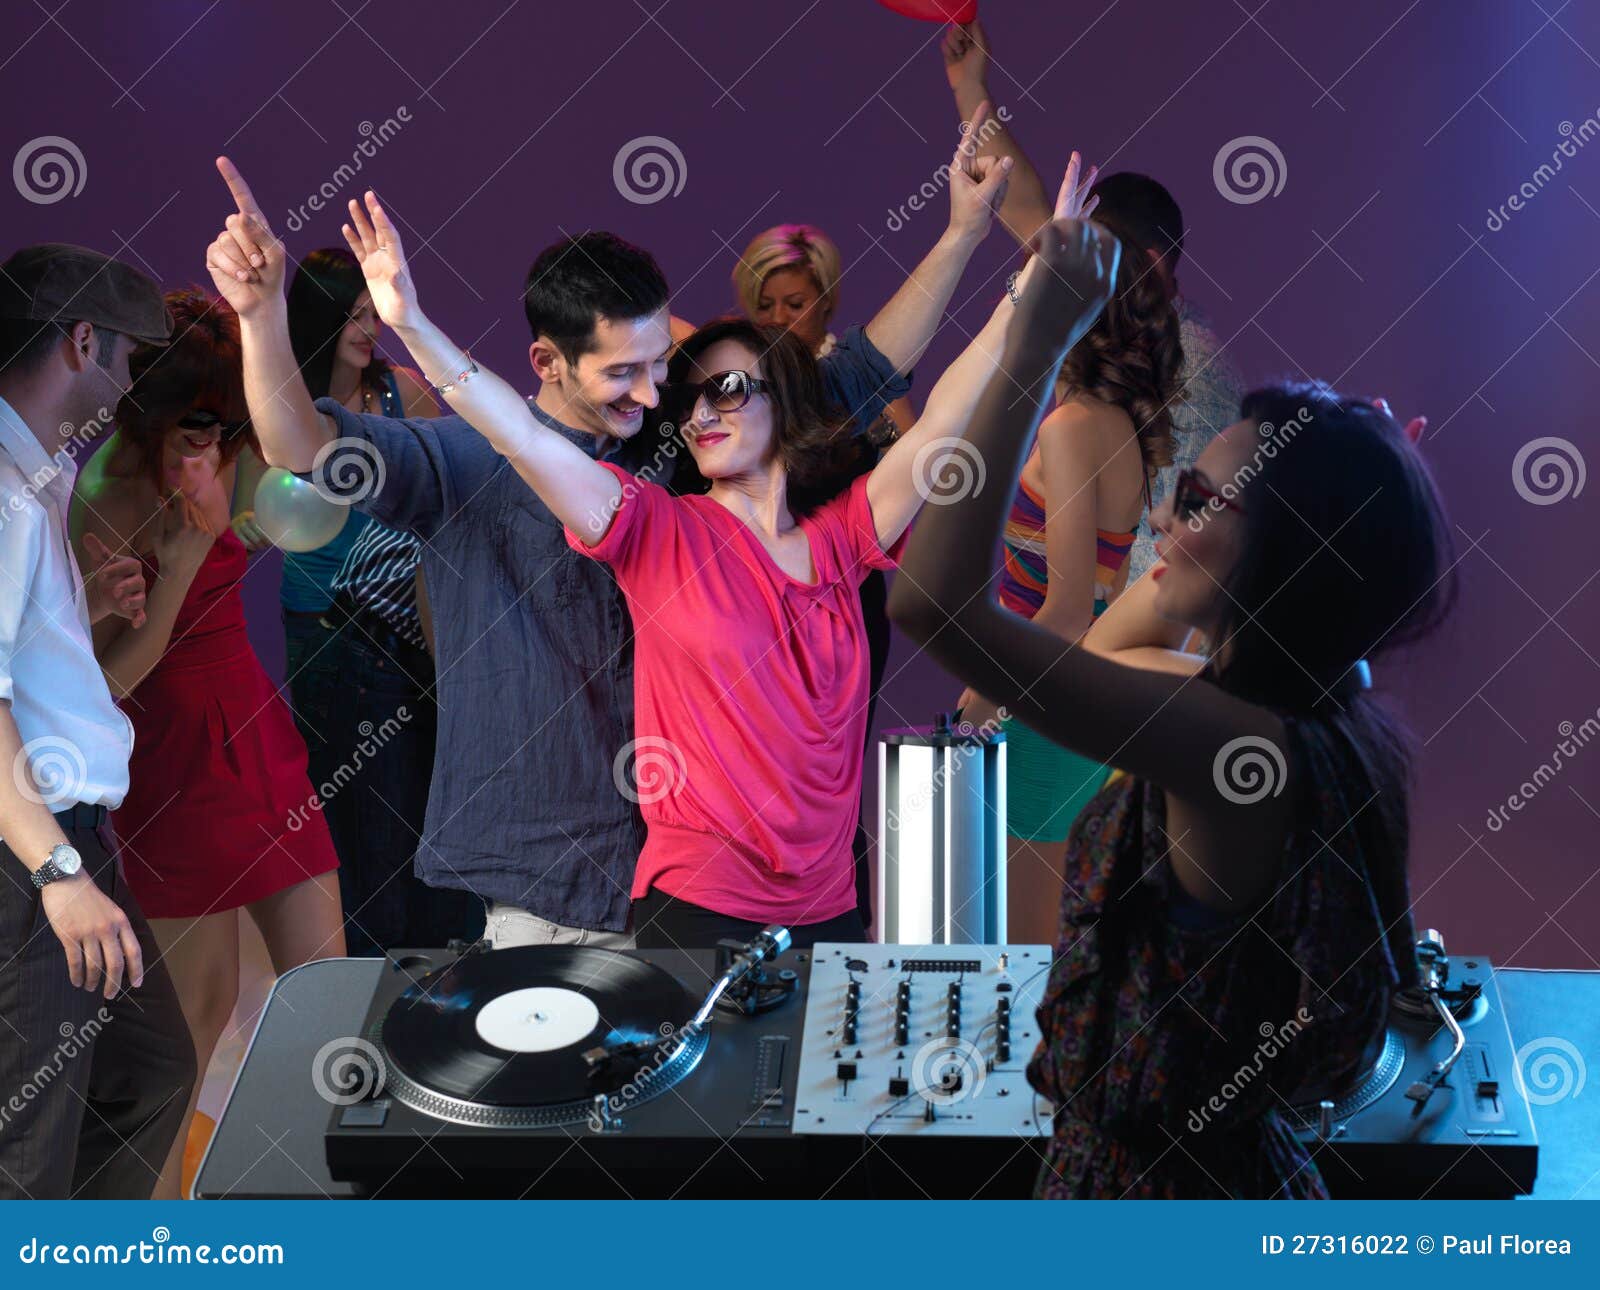 Careless People Enjoying Themselves at Party Stock Photo - Image of ...